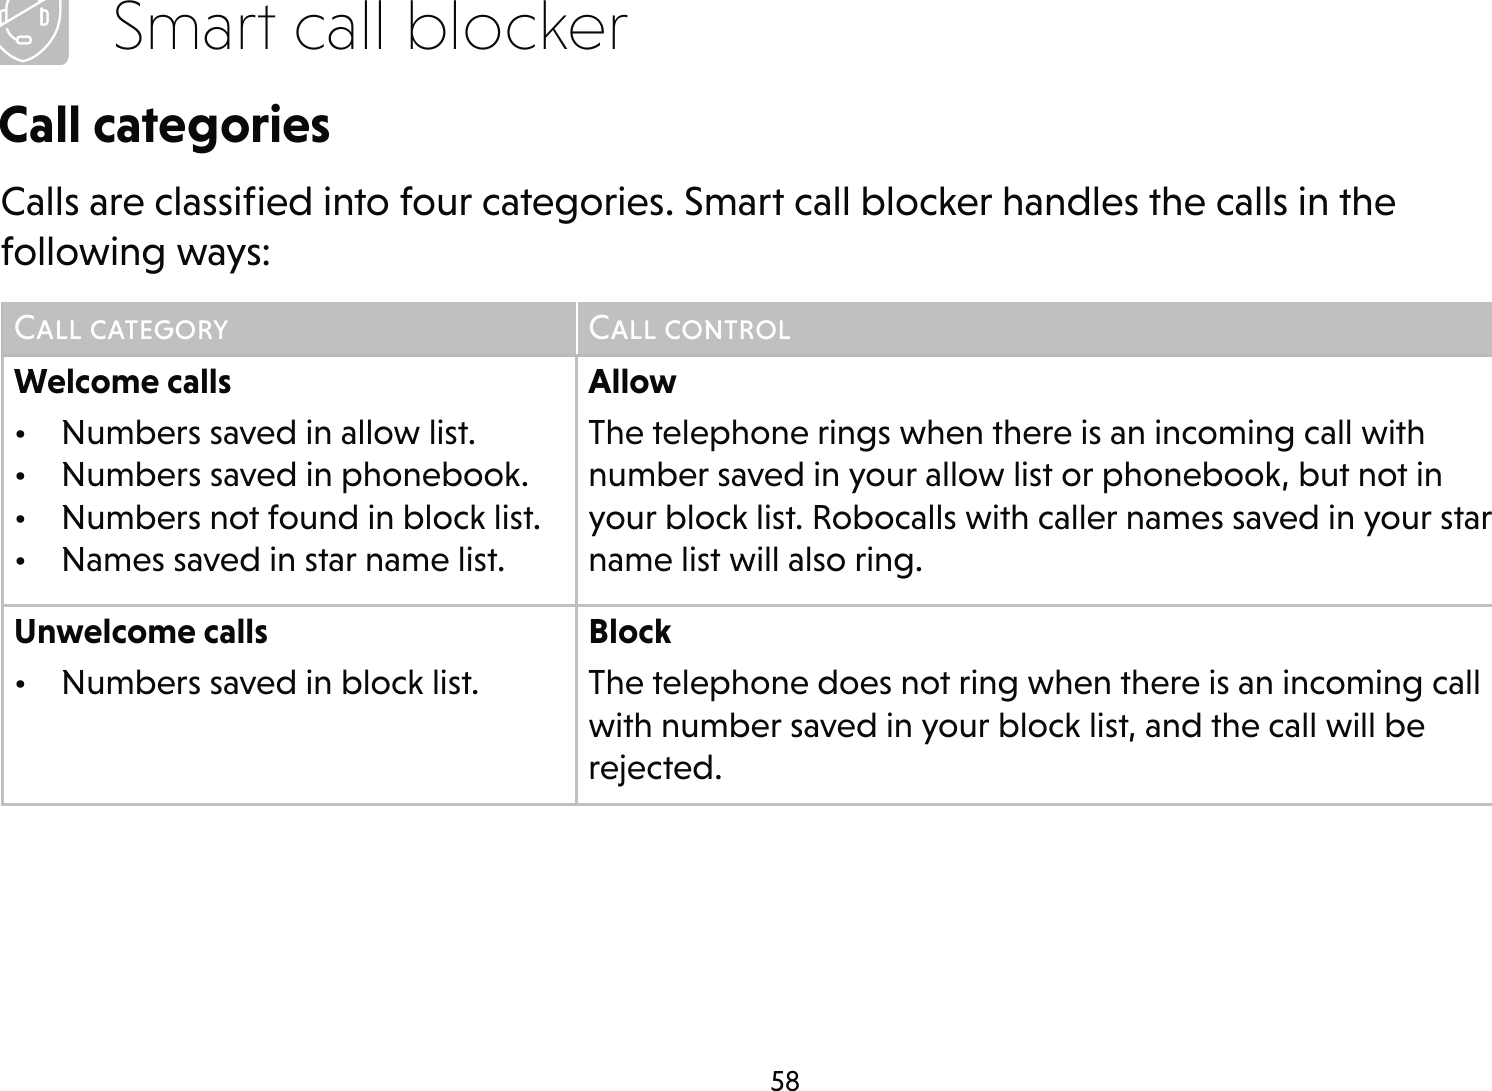 58Smart call blockerCall categoriesCalls are classiﬁed into four categories. Smart call blocker handles the calls in the following ways:Call category Call controlWelcome calls•  Numbers saved in allow list.•  Numbers saved in phonebook.•  Numbers not found in block list.•  Names saved in star name list.AllowThe telephone rings when there is an incoming call with number saved in your allow list or phonebook, but not in your block list. Robocalls with caller names saved in your star name list will also ring.Unwelcome calls•  Numbers saved in block list.BlockThe telephone does not ring when there is an incoming call with number saved in your block list, and the call will be rejected.